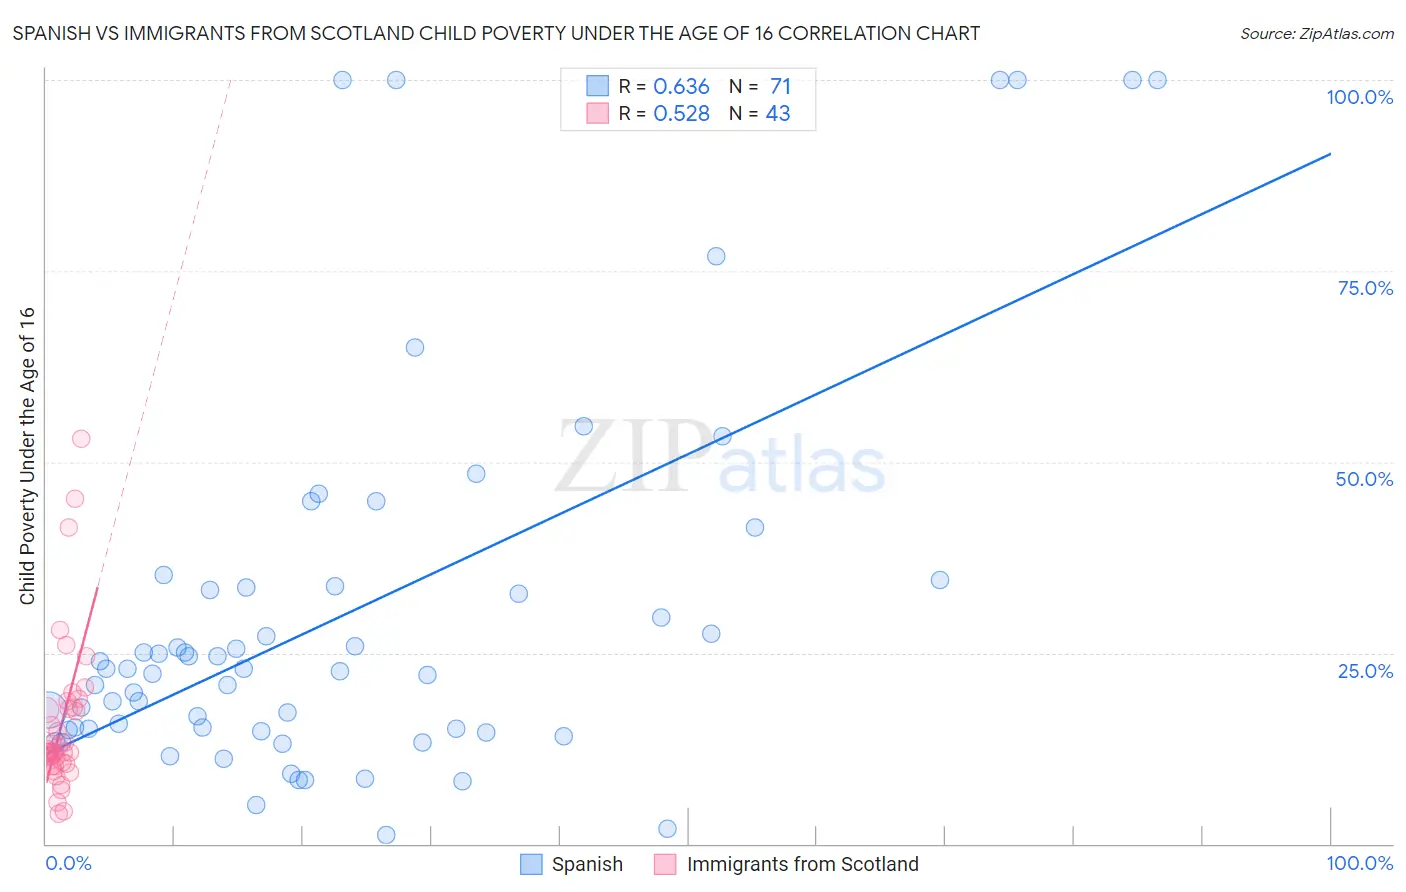 Spanish vs Immigrants from Scotland Child Poverty Under the Age of 16